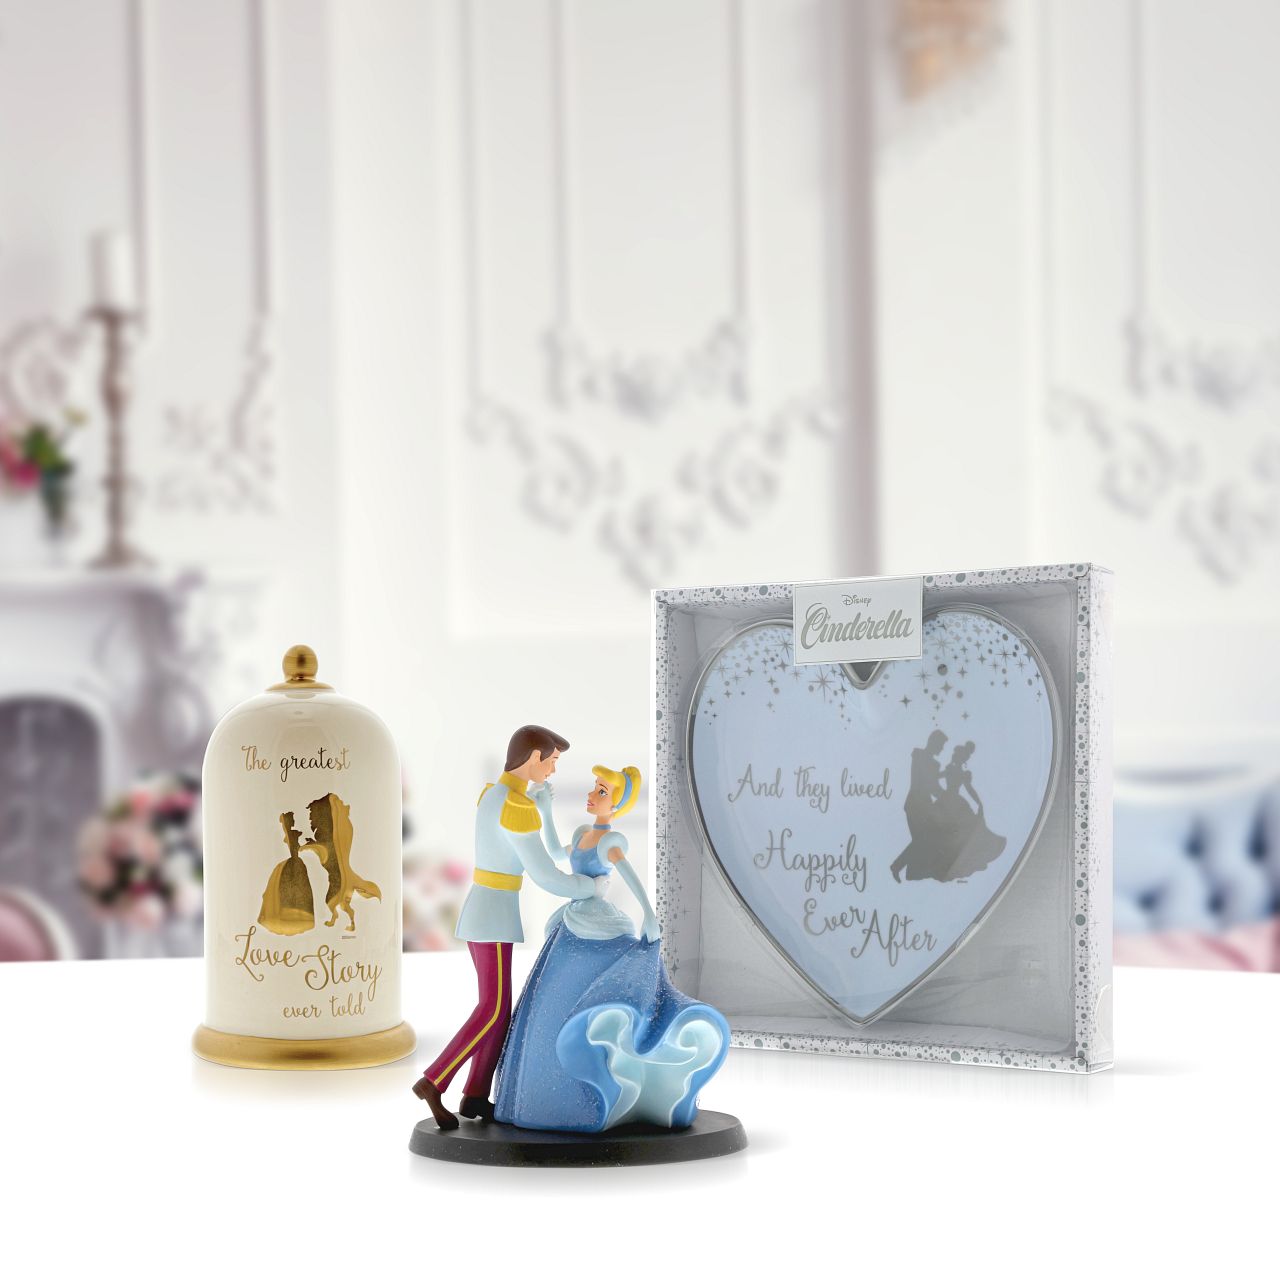 Disney Cinderella Wedding Cake Topper  Place this enchanted Cinderella and Prince Charming figurine on top of your wedding cake using the plastic dish provided for a perfect representation of your happy ever after. The figurine is made from cast stone. 